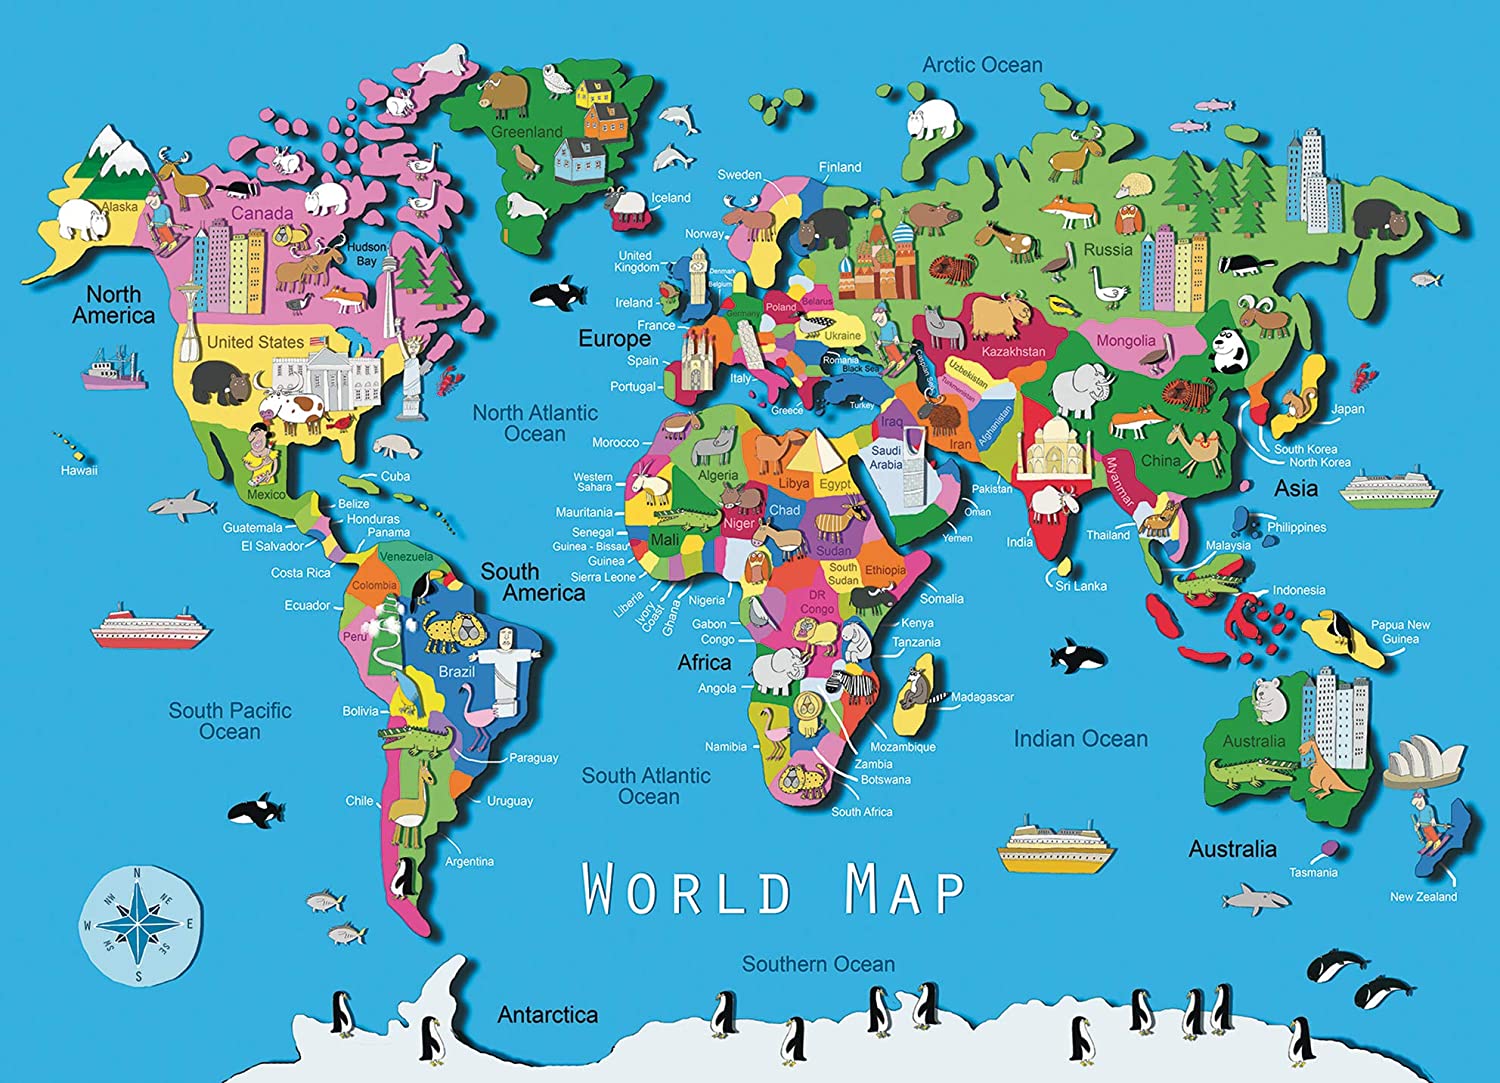 World Map 60 Pieces by Ravensburger #09607